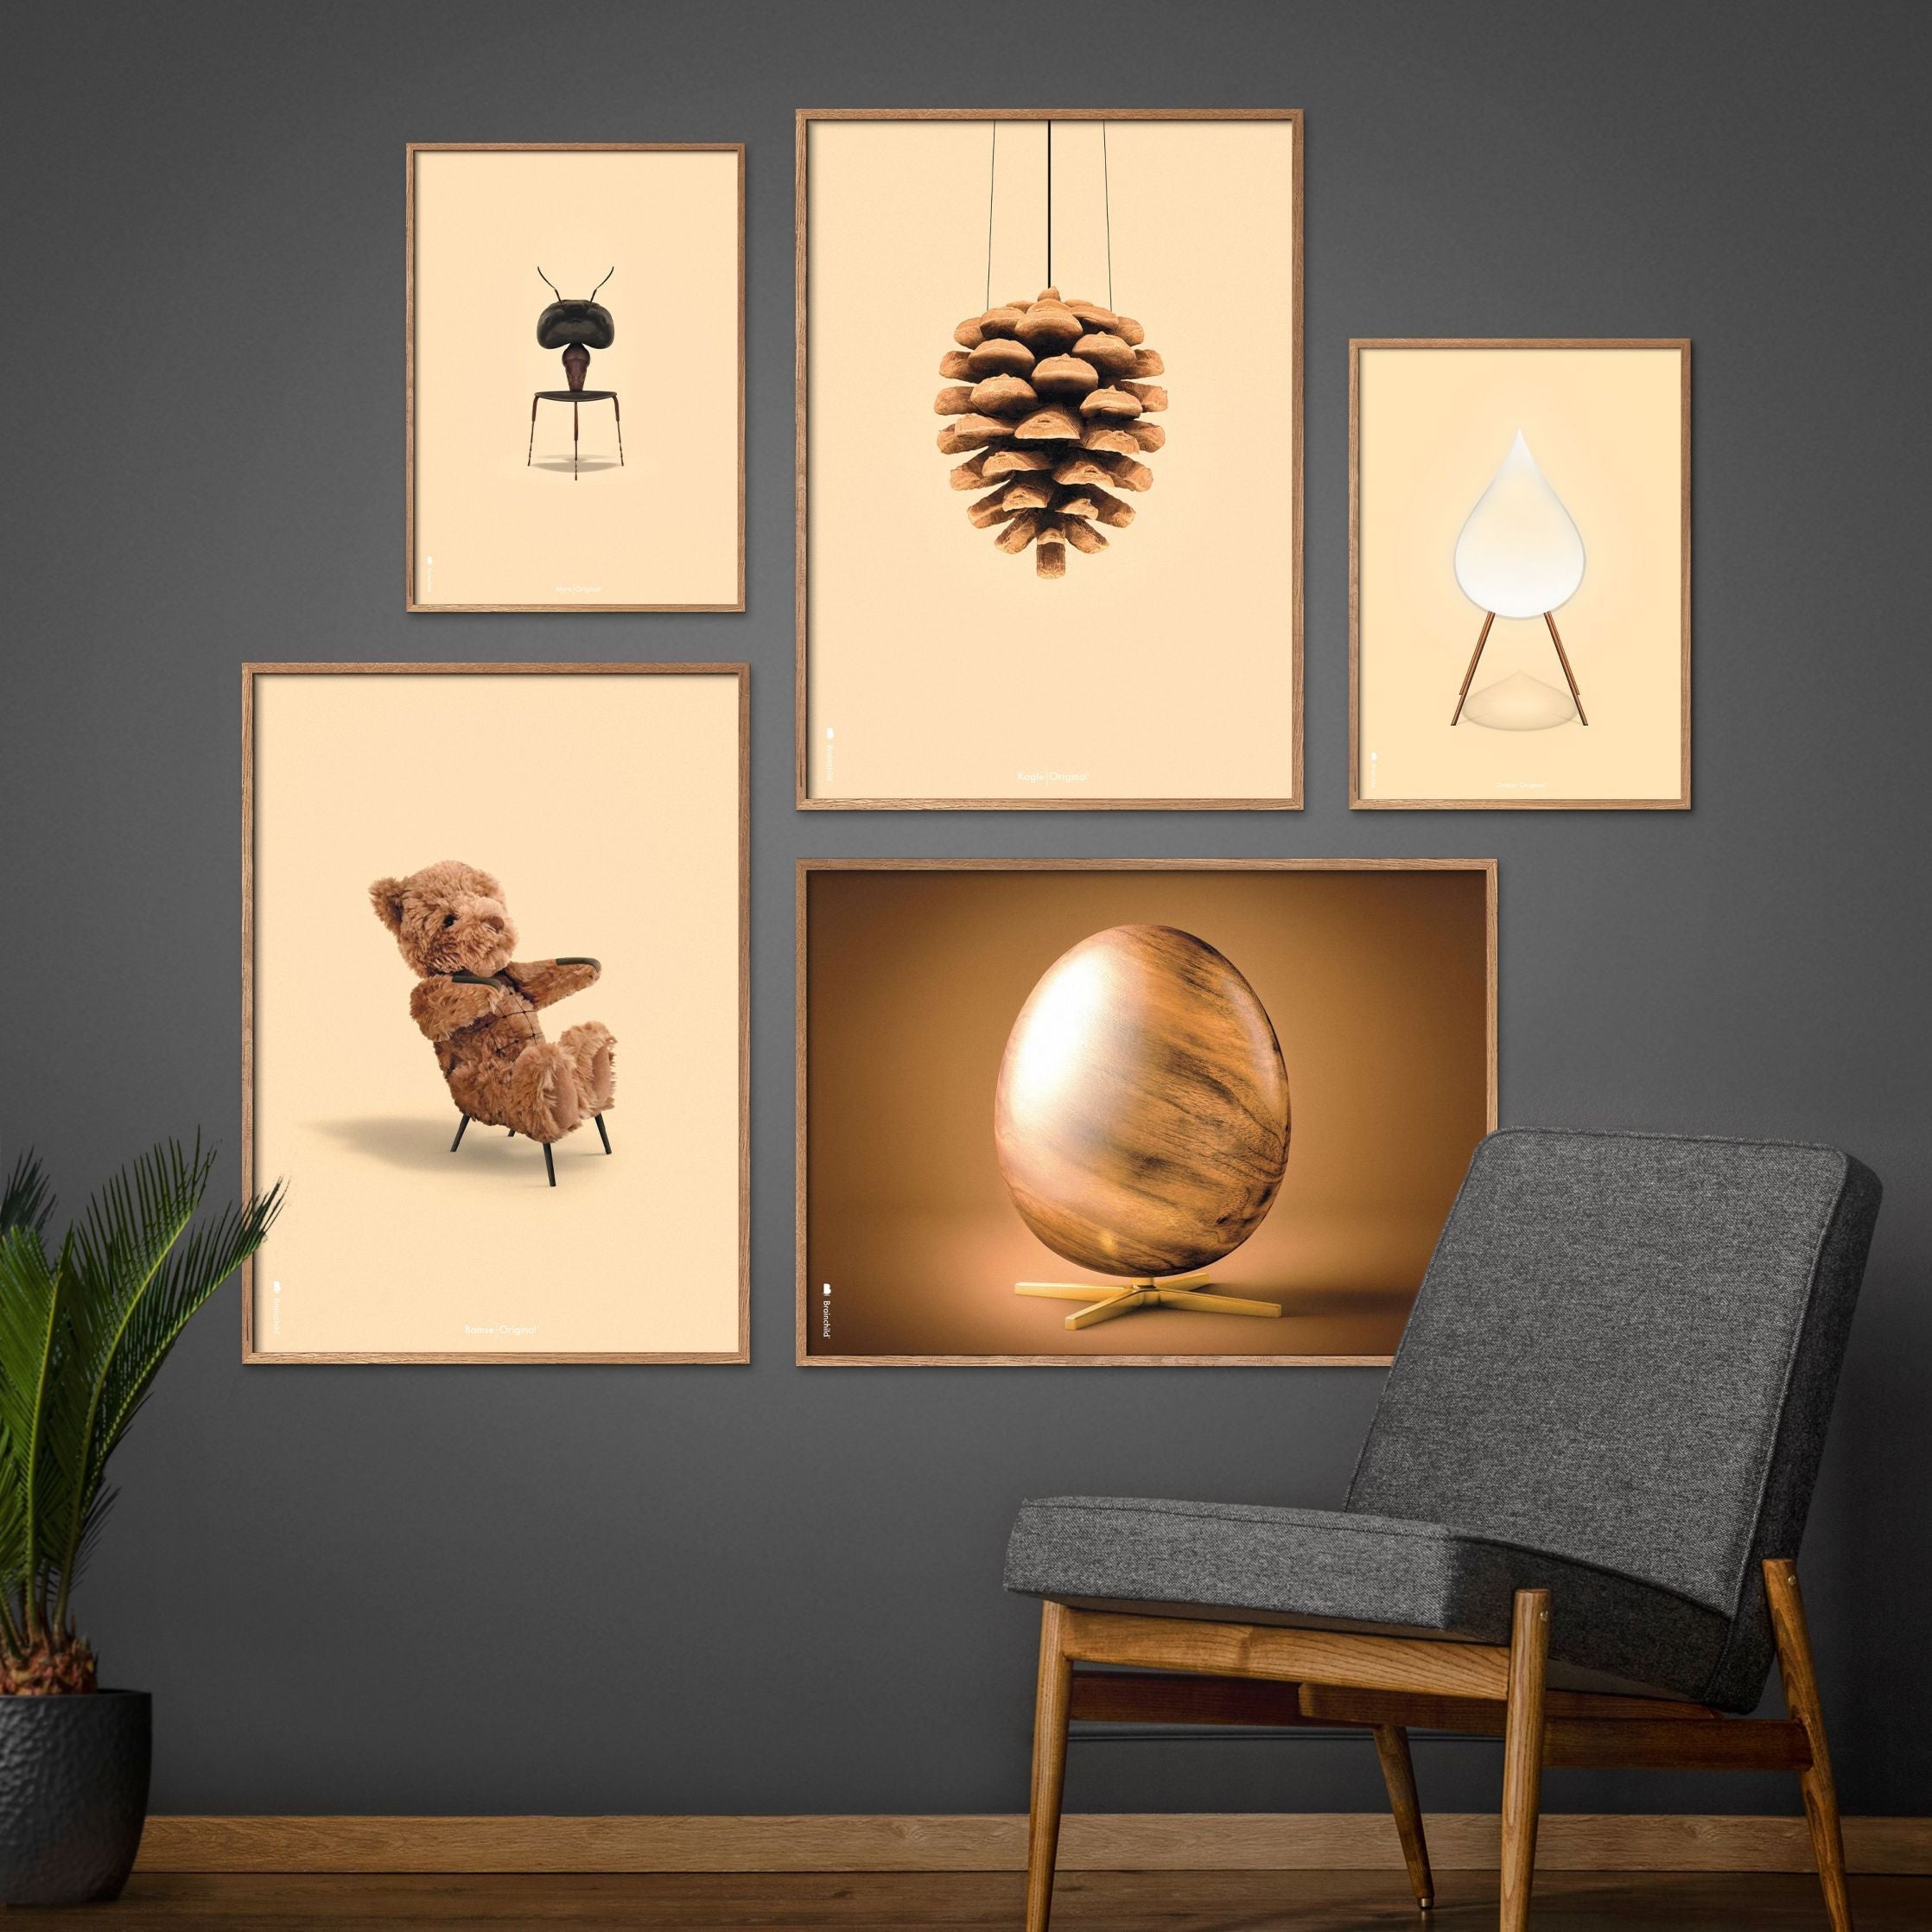 Brainchild Teddy Bear Classic Poster, Frame Made Of Dark Wood 50x70 Cm, Sand Colored Background